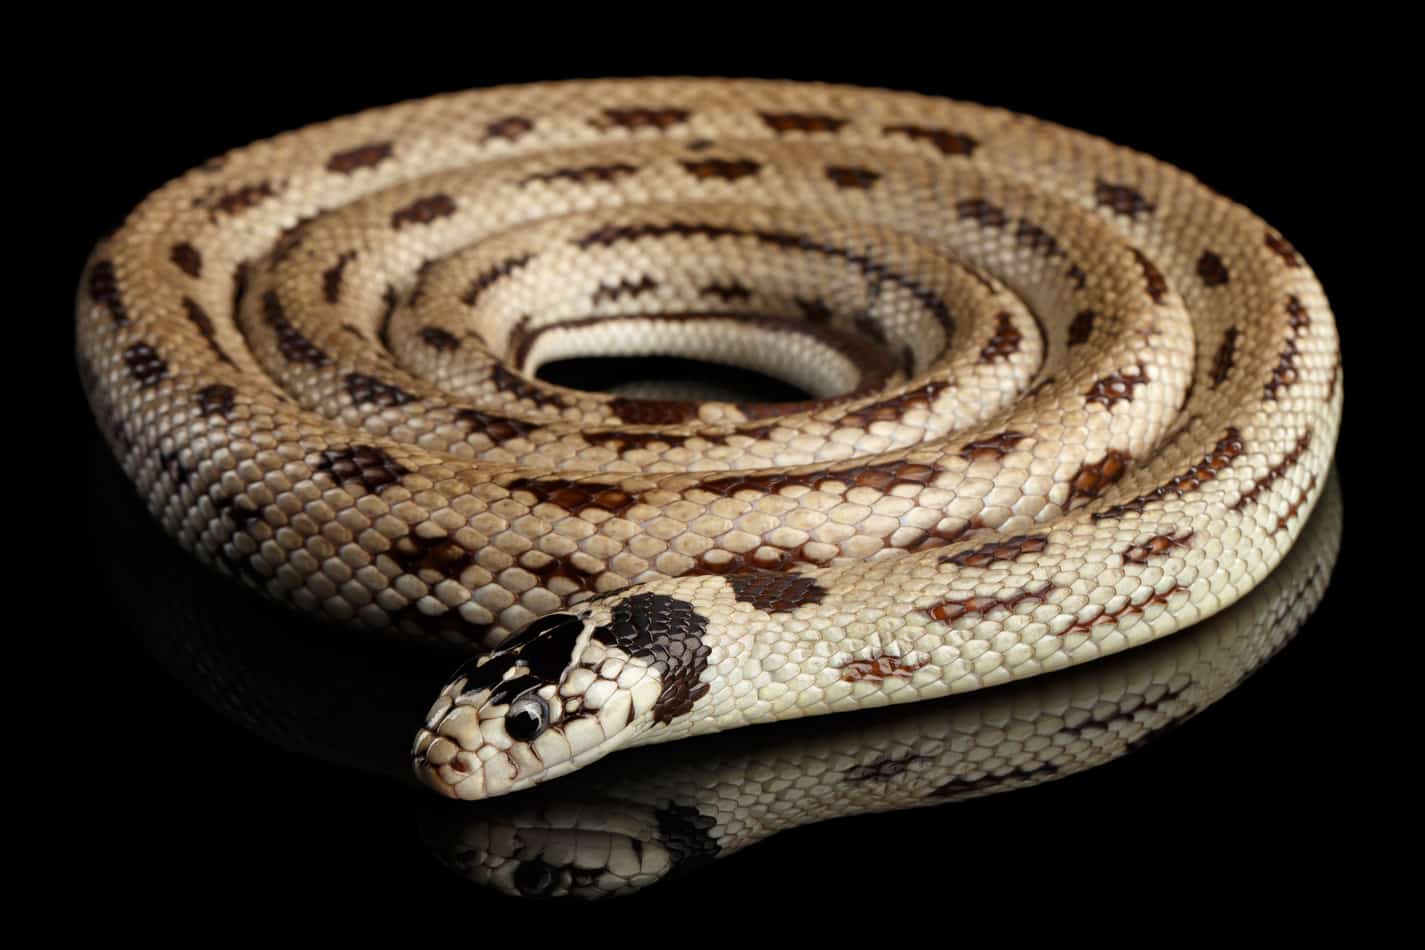 How long do king snakes get How Long Do King Snakes Get? (And How Long It Takes To Grow)